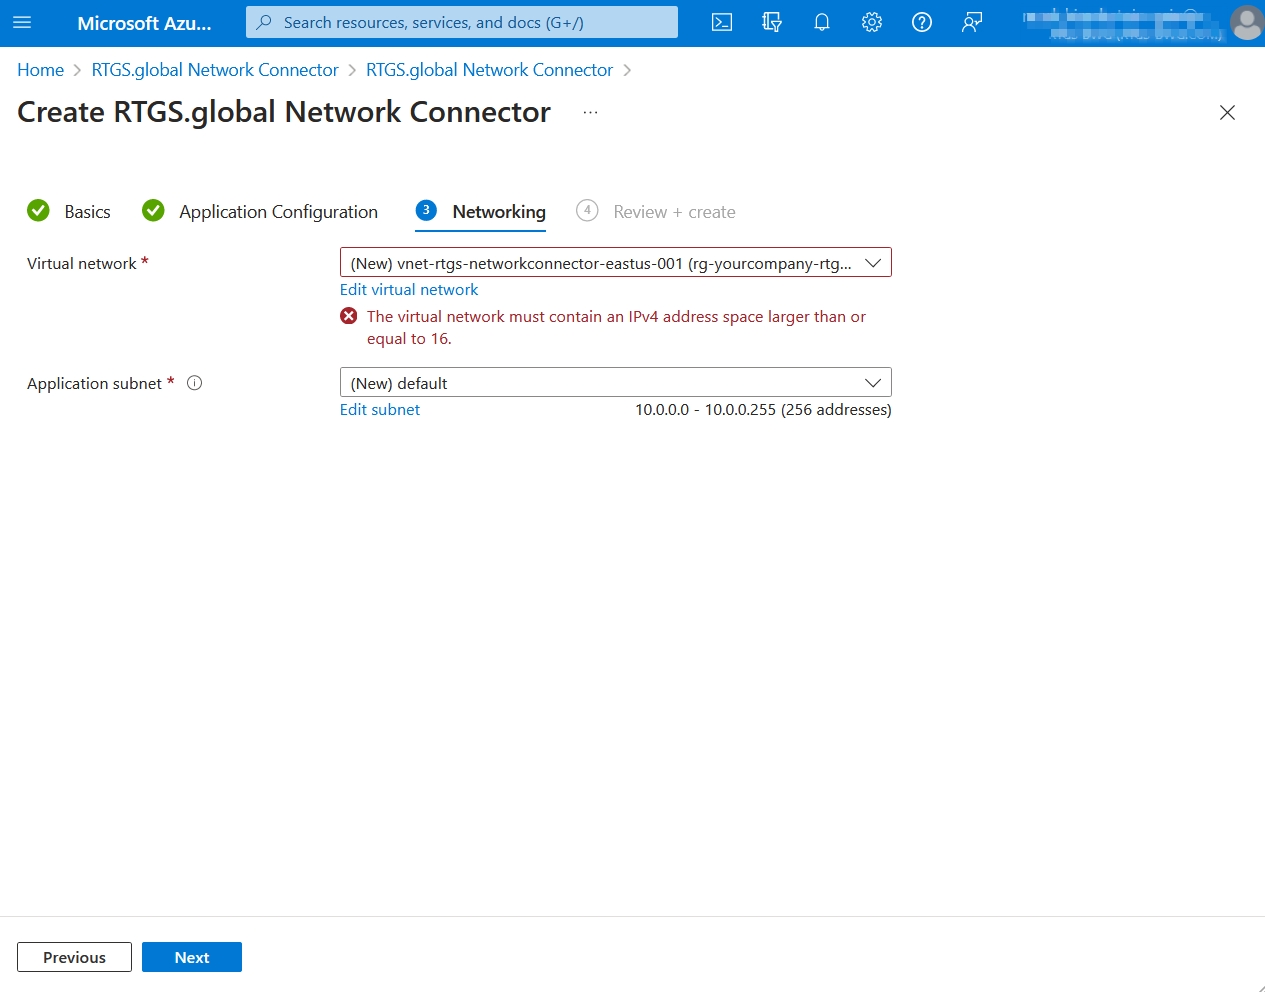 Image showing the fourth step of the RTGS.global Network Connector deployment wizard